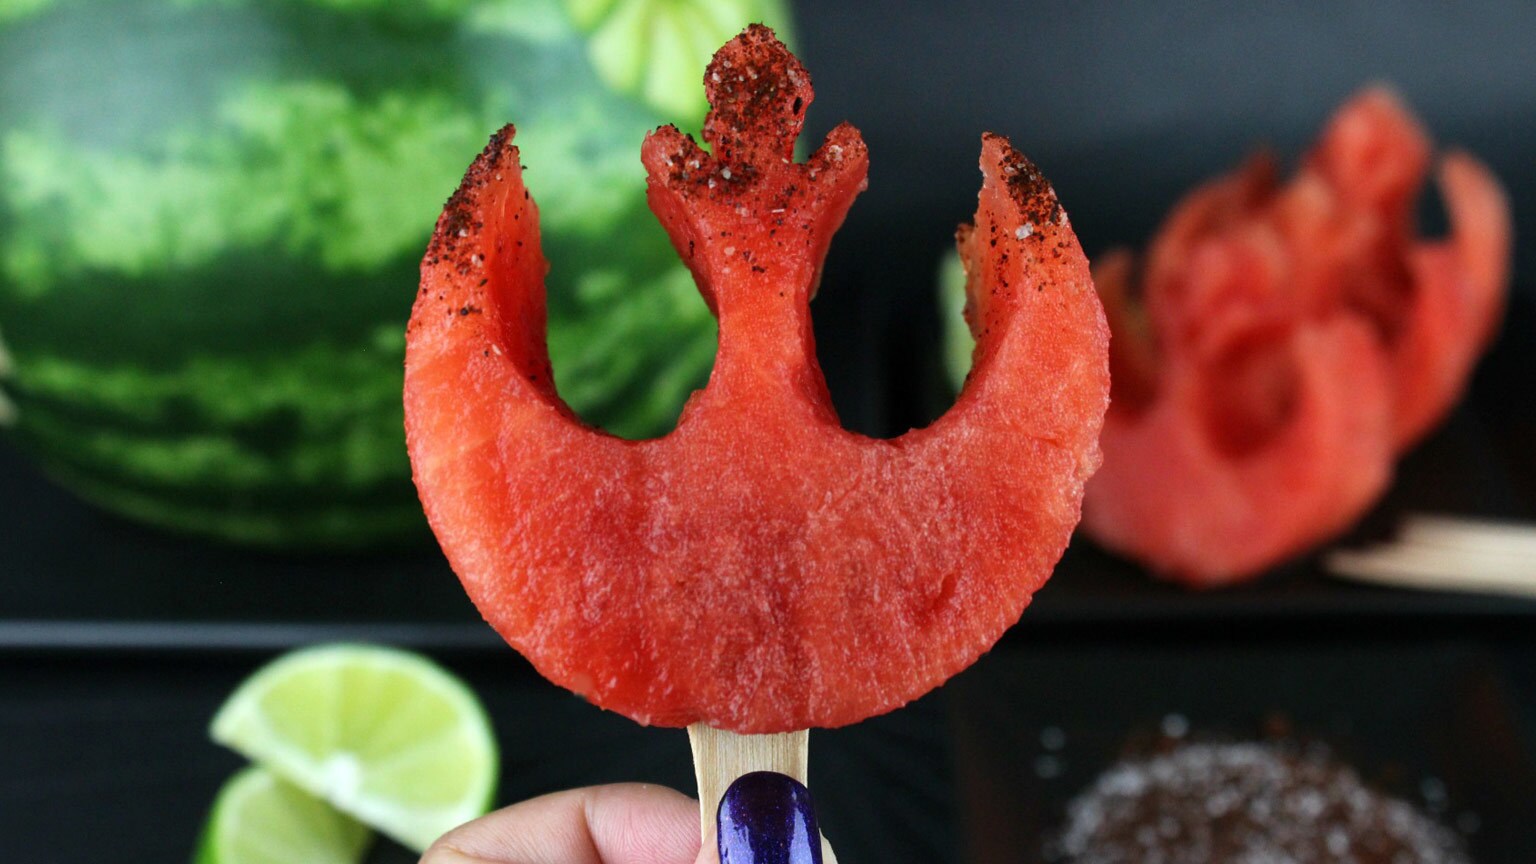 Fight Imperial Heat with Rebel Alliance Chili-Lime Melon Pops